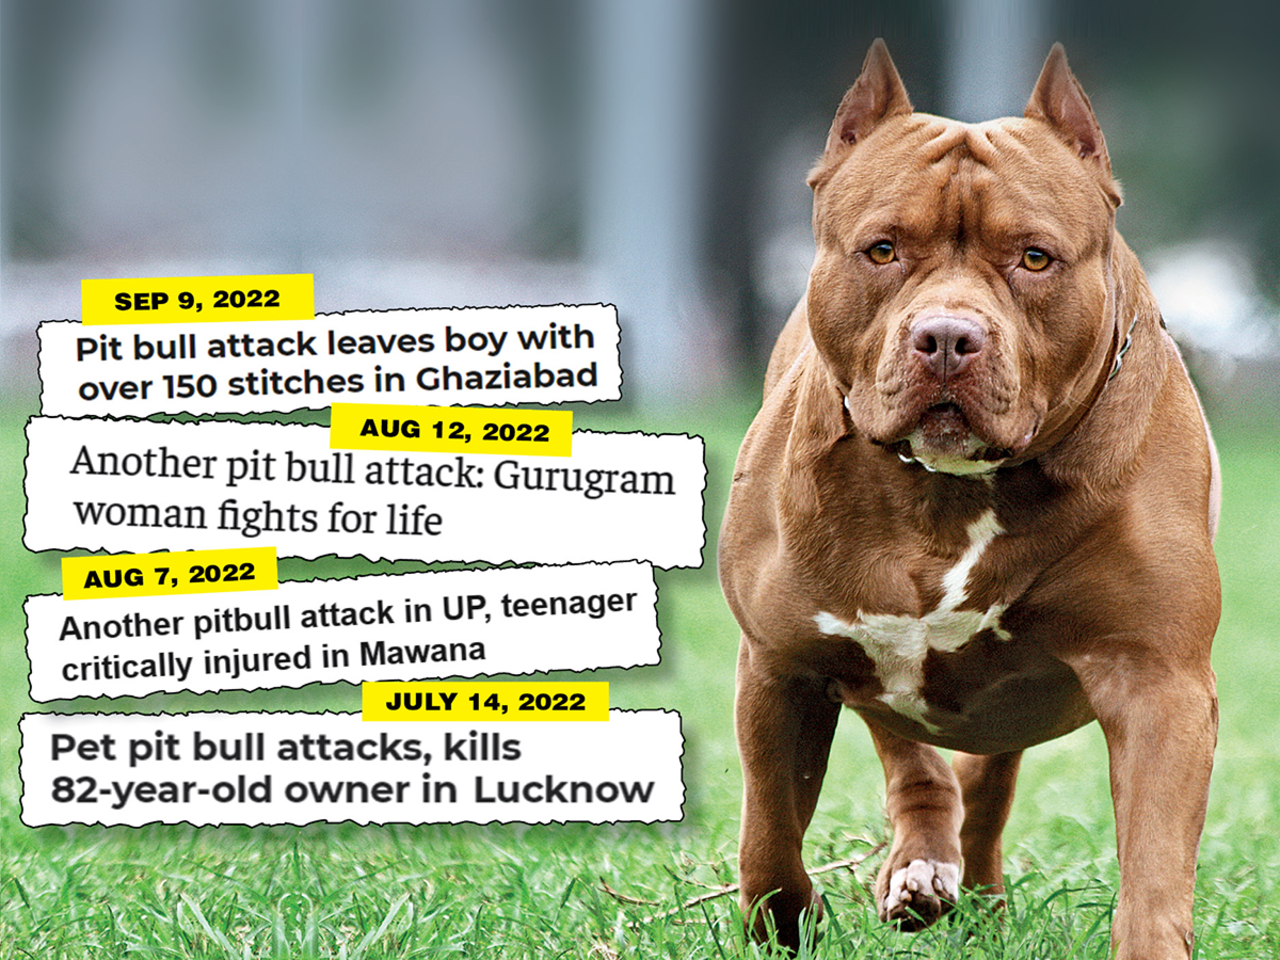 Increase in pit bull attacks, experts say 'stop illegal breeding, train  dogs, educate owners about breed' - Times of India